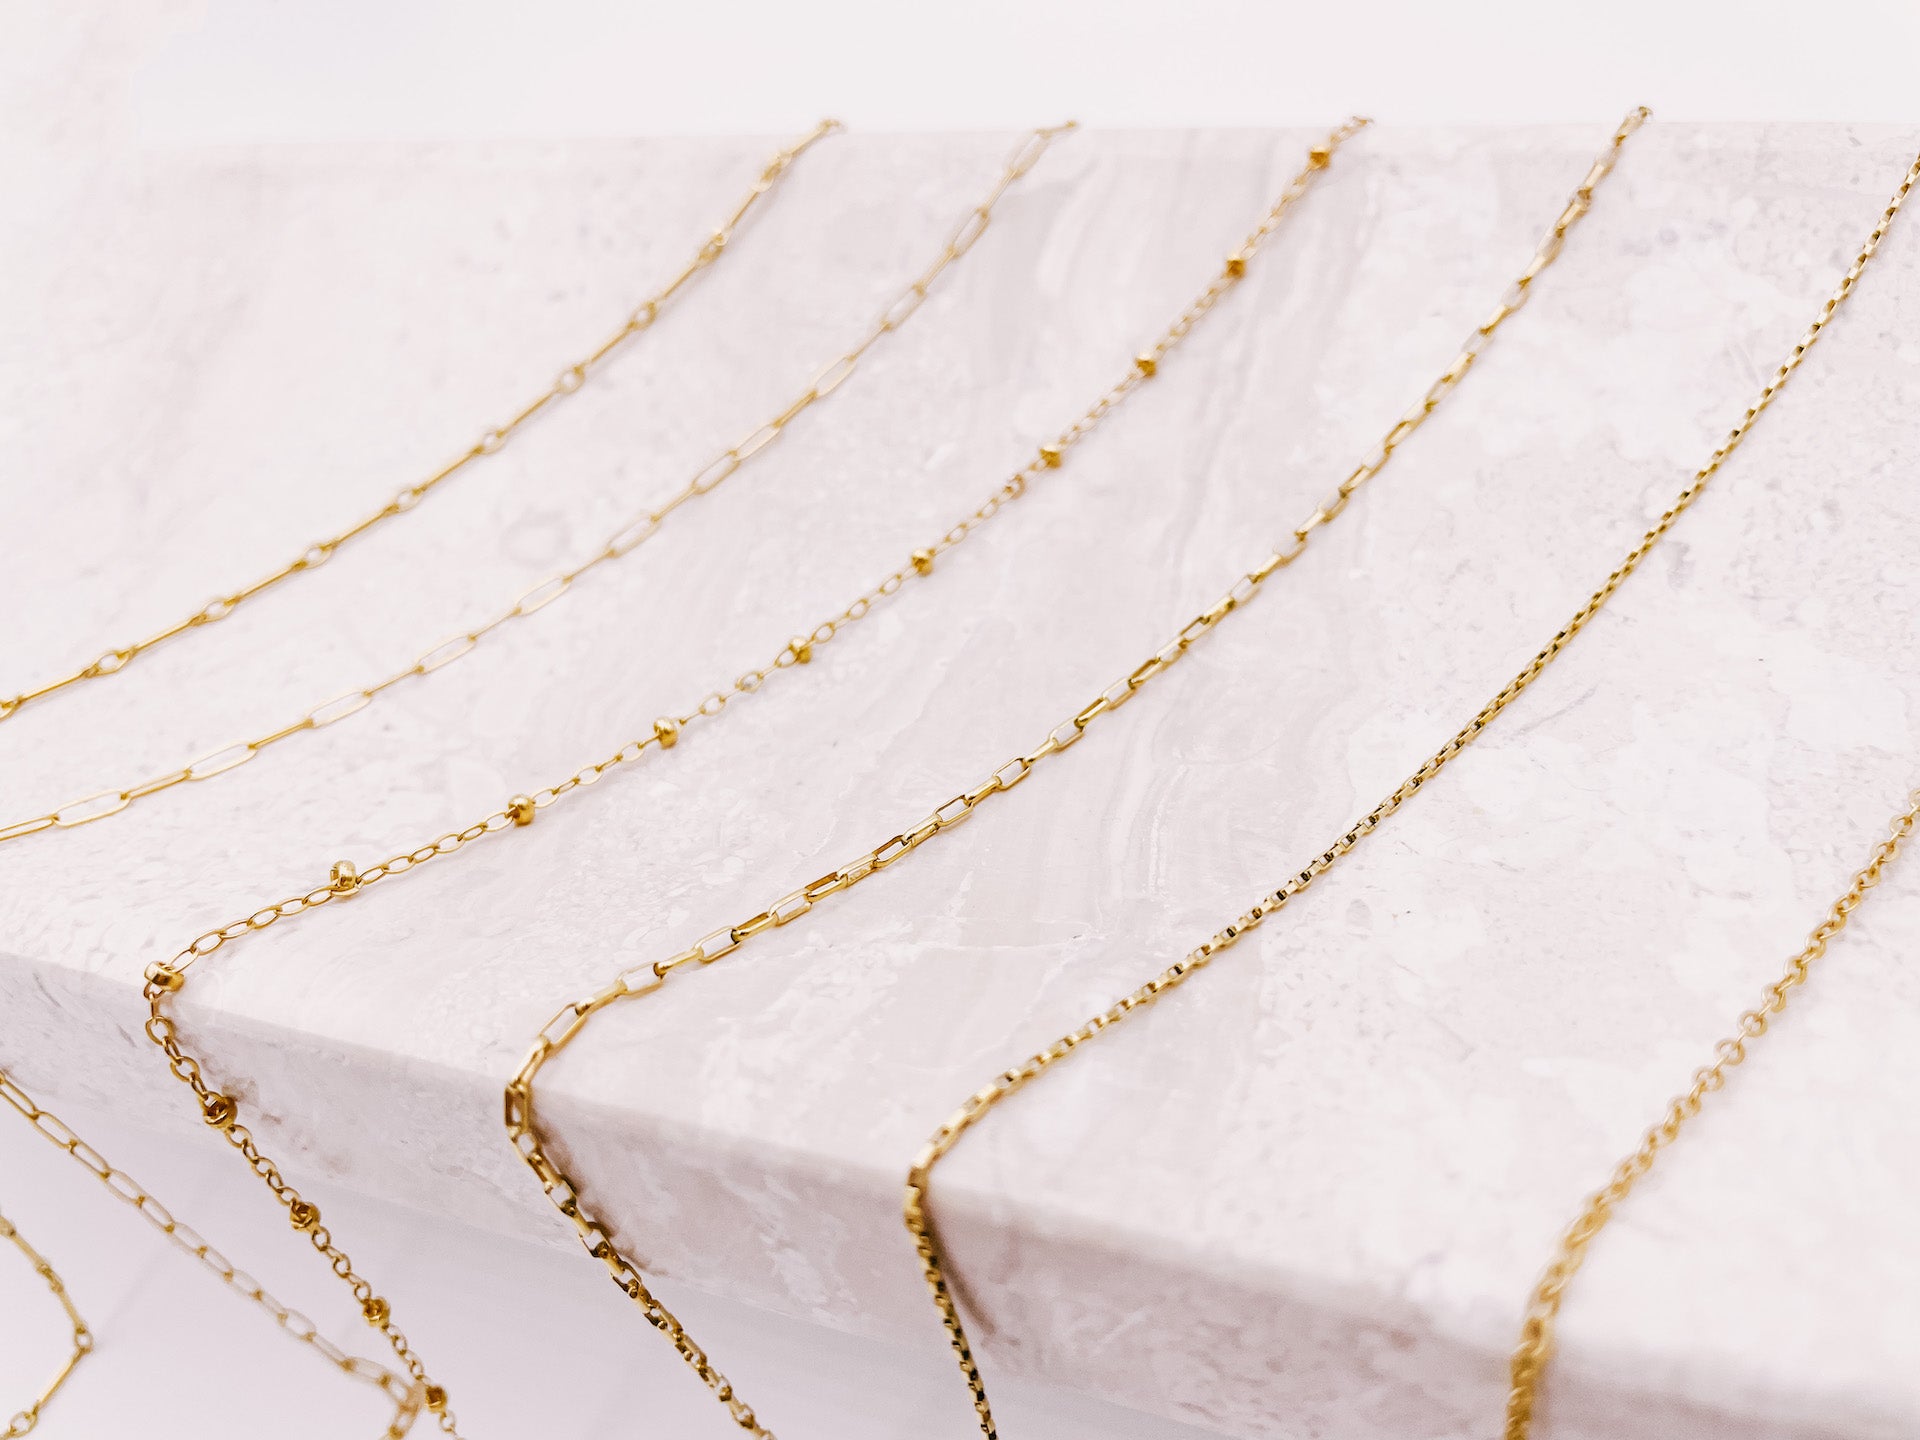 6 layering chains draped on tray from AW Boutique gold filled jewellery.